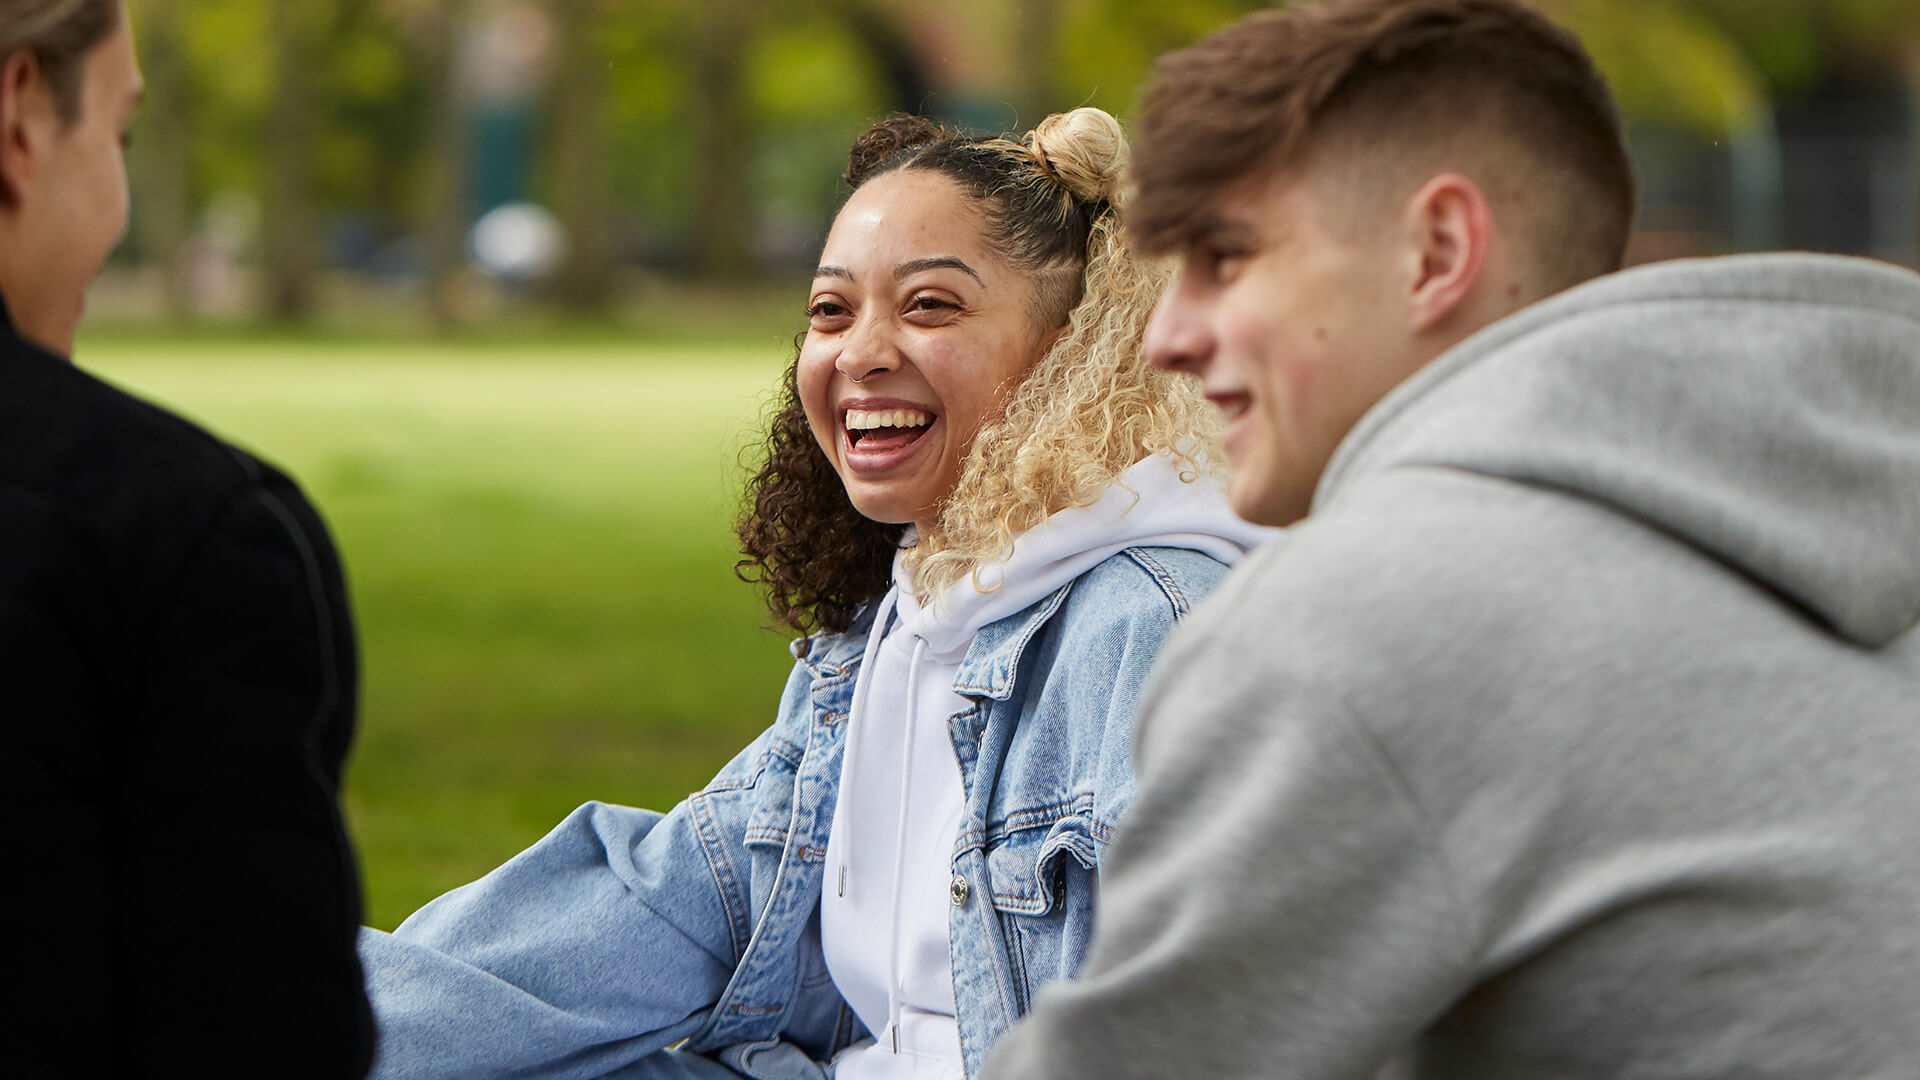 Three young people sit in a park, chatting. The person in the middle has curly hair and wears a denim jacket and is laughing, while looking at the two other young people. The person on the right is wearing a grey hoodie, the person on the left wears a black jacket.